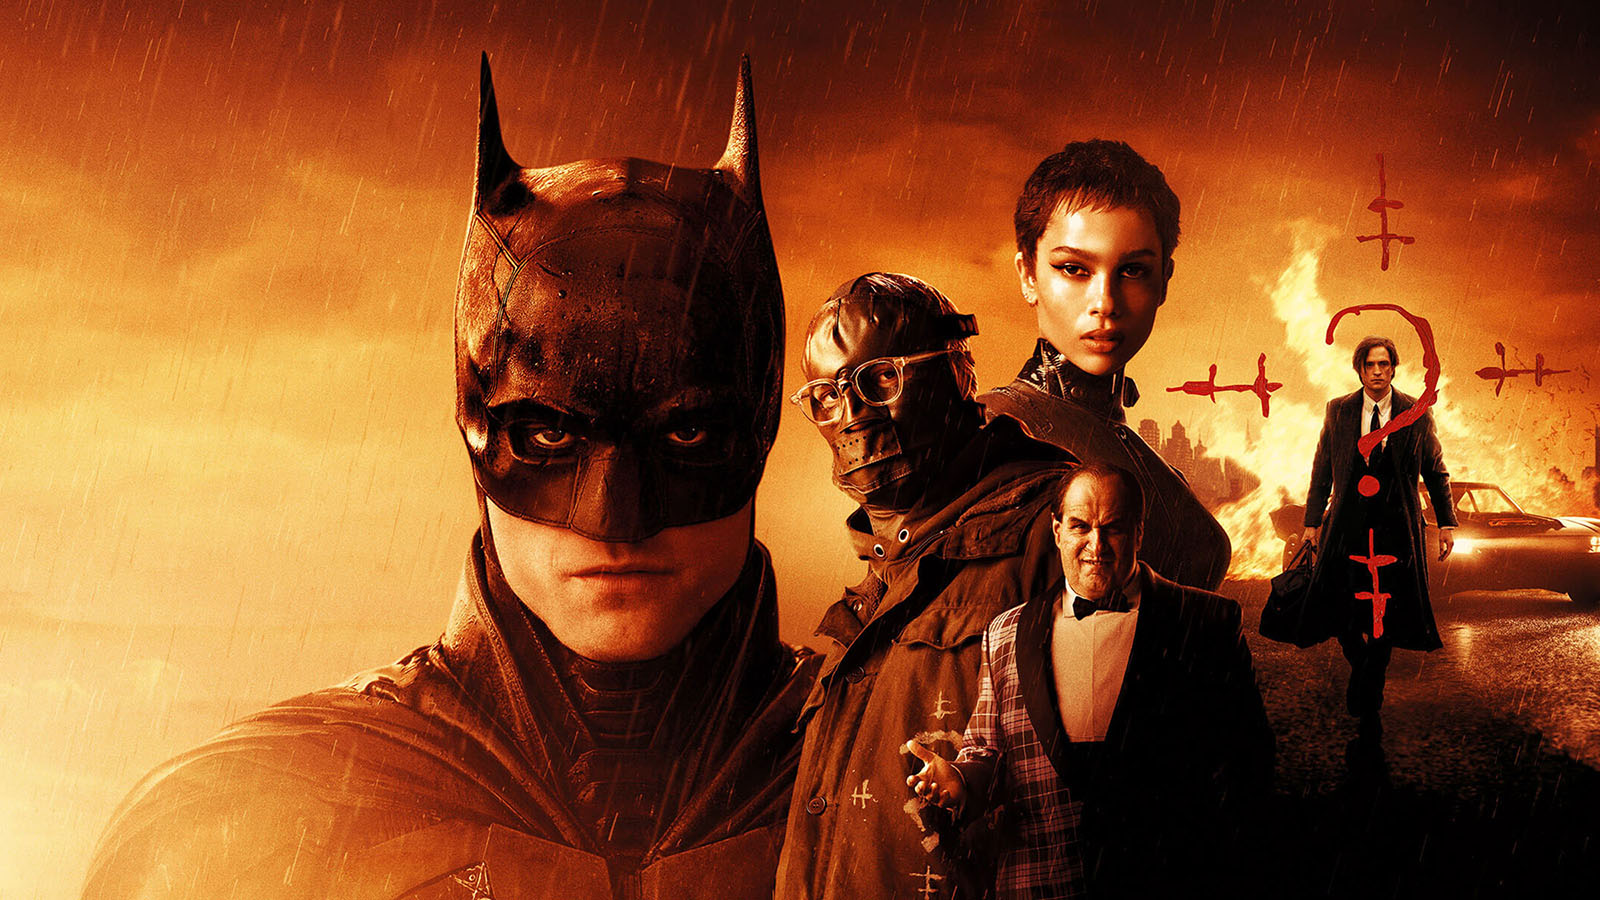 Moviegoers paid extra to watch The Batman on the big screen. Image © Warner Bros.